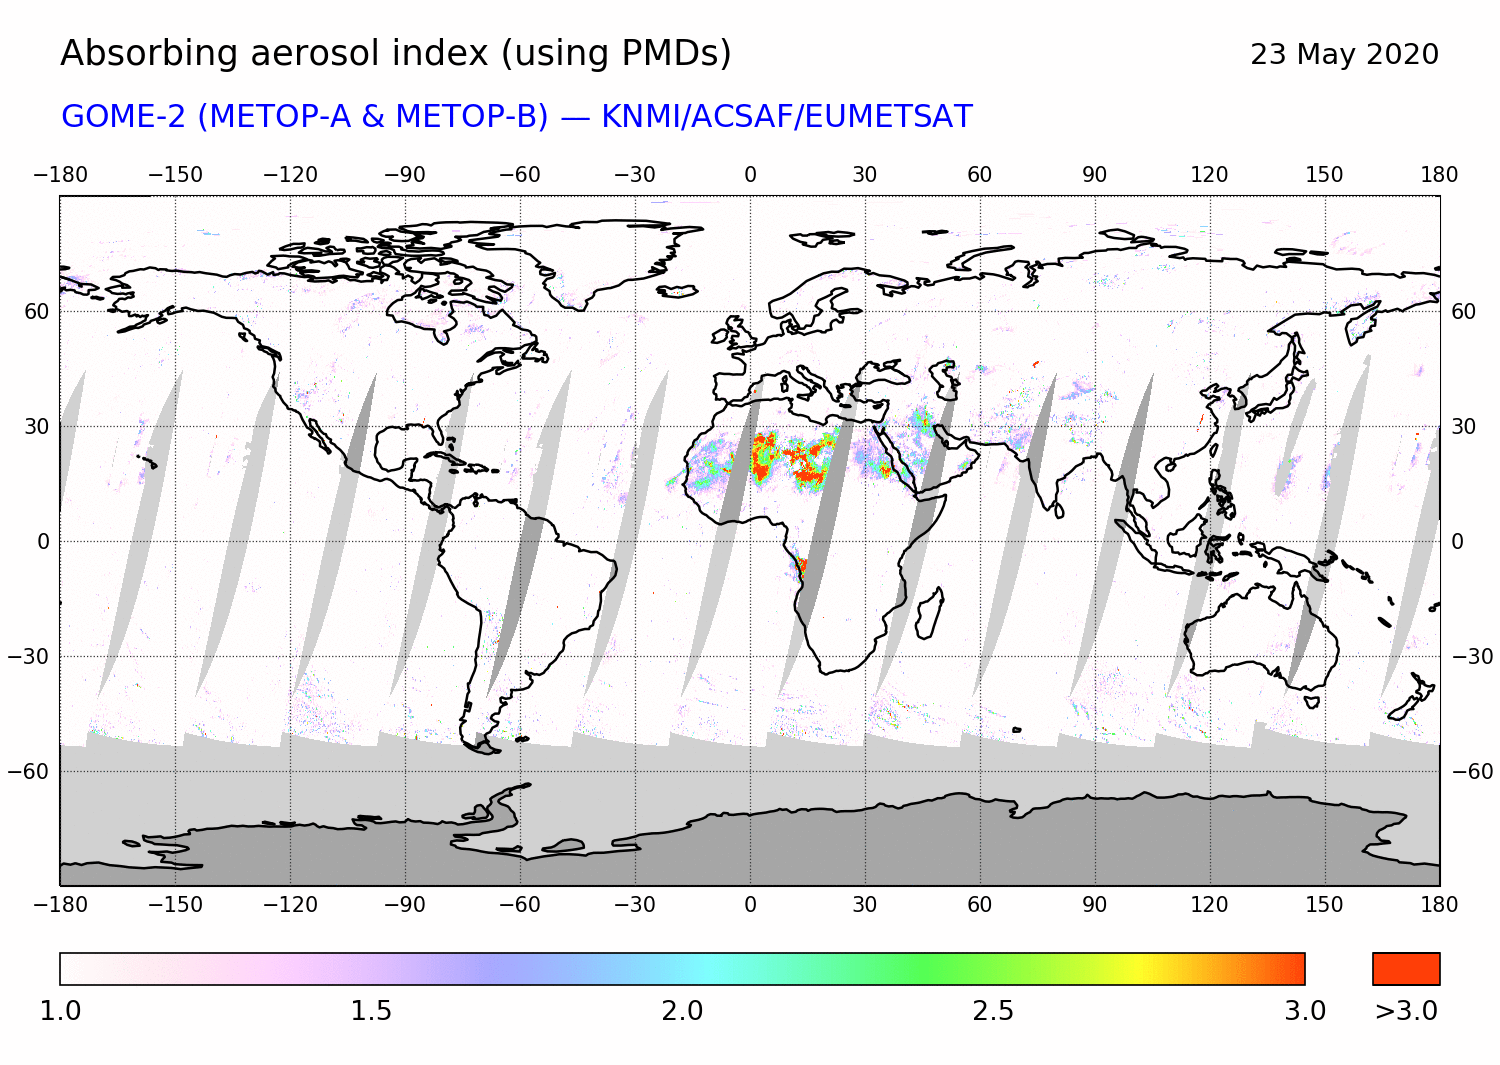 GOME-2 - Absorbing aerosol index of 23 May 2020